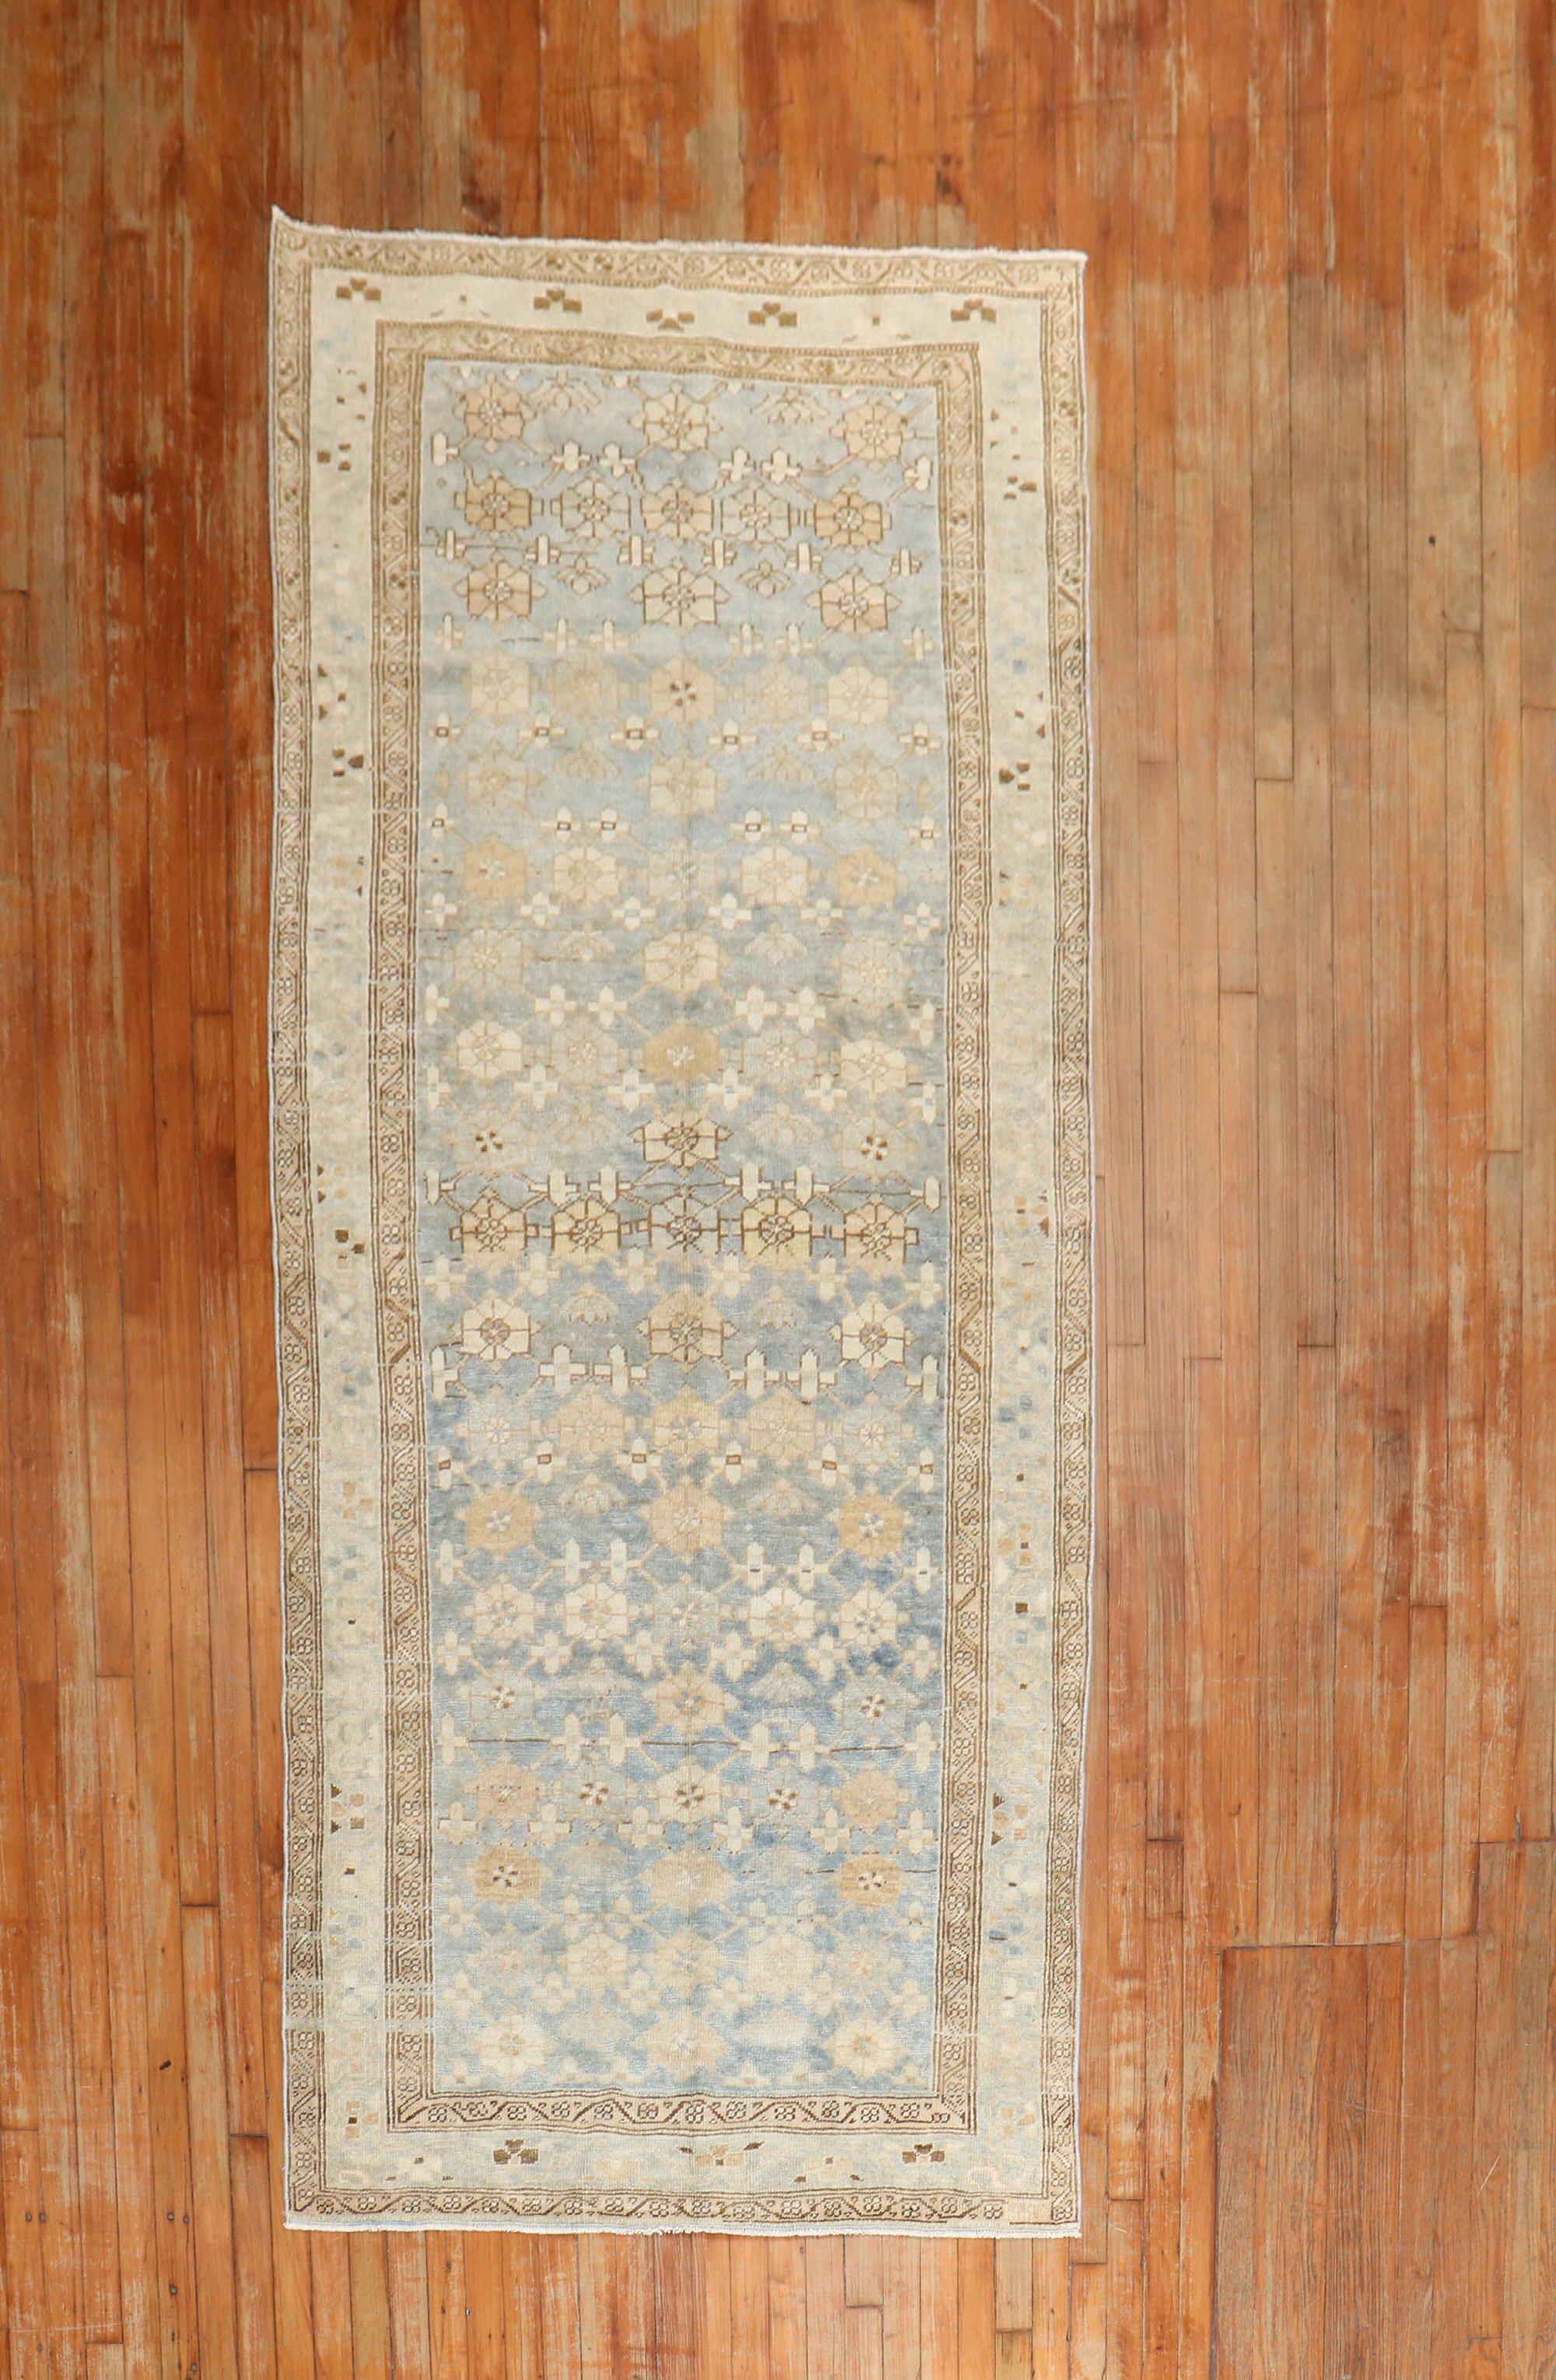 An antique Persian Malayer intermediate size rug from the 2nd quarter of the 20th century in blue, brown, sand, gray, and camel tones

Measures: 3'11” x 9'7''.